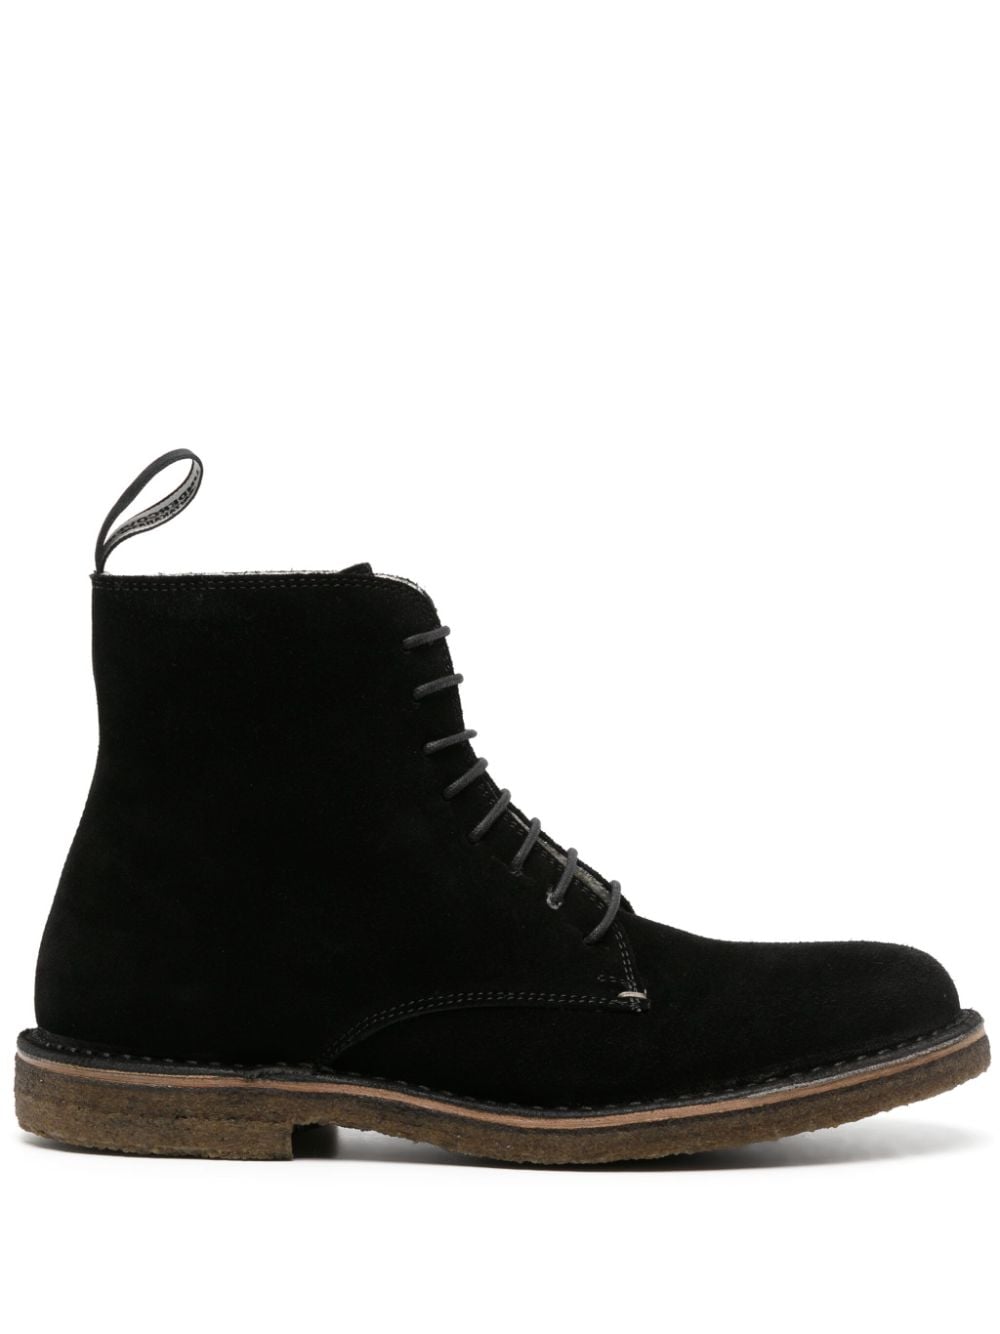 Undercover x Astorflex lace-up leather boots - Black von Undercover